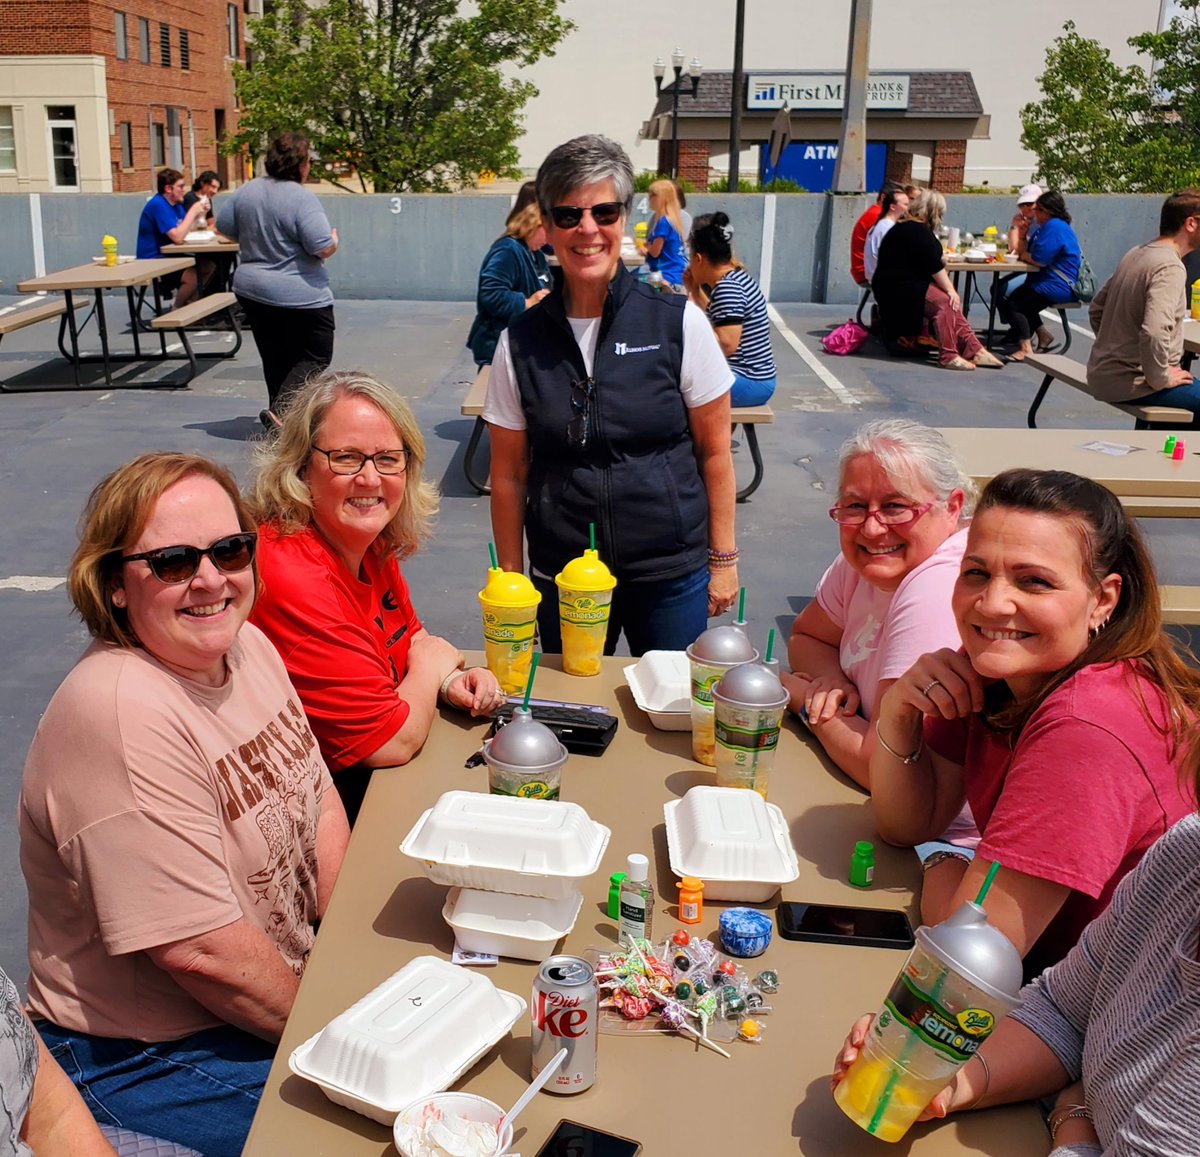 Our employees enjoyed tailgating in celebration of our #GreatPlaceToWork certification for the 4th year in a row with a “Food Truck Fri-Yay”!

Want to join our team? Learn more about our current openings: ilmutual.co/Careers